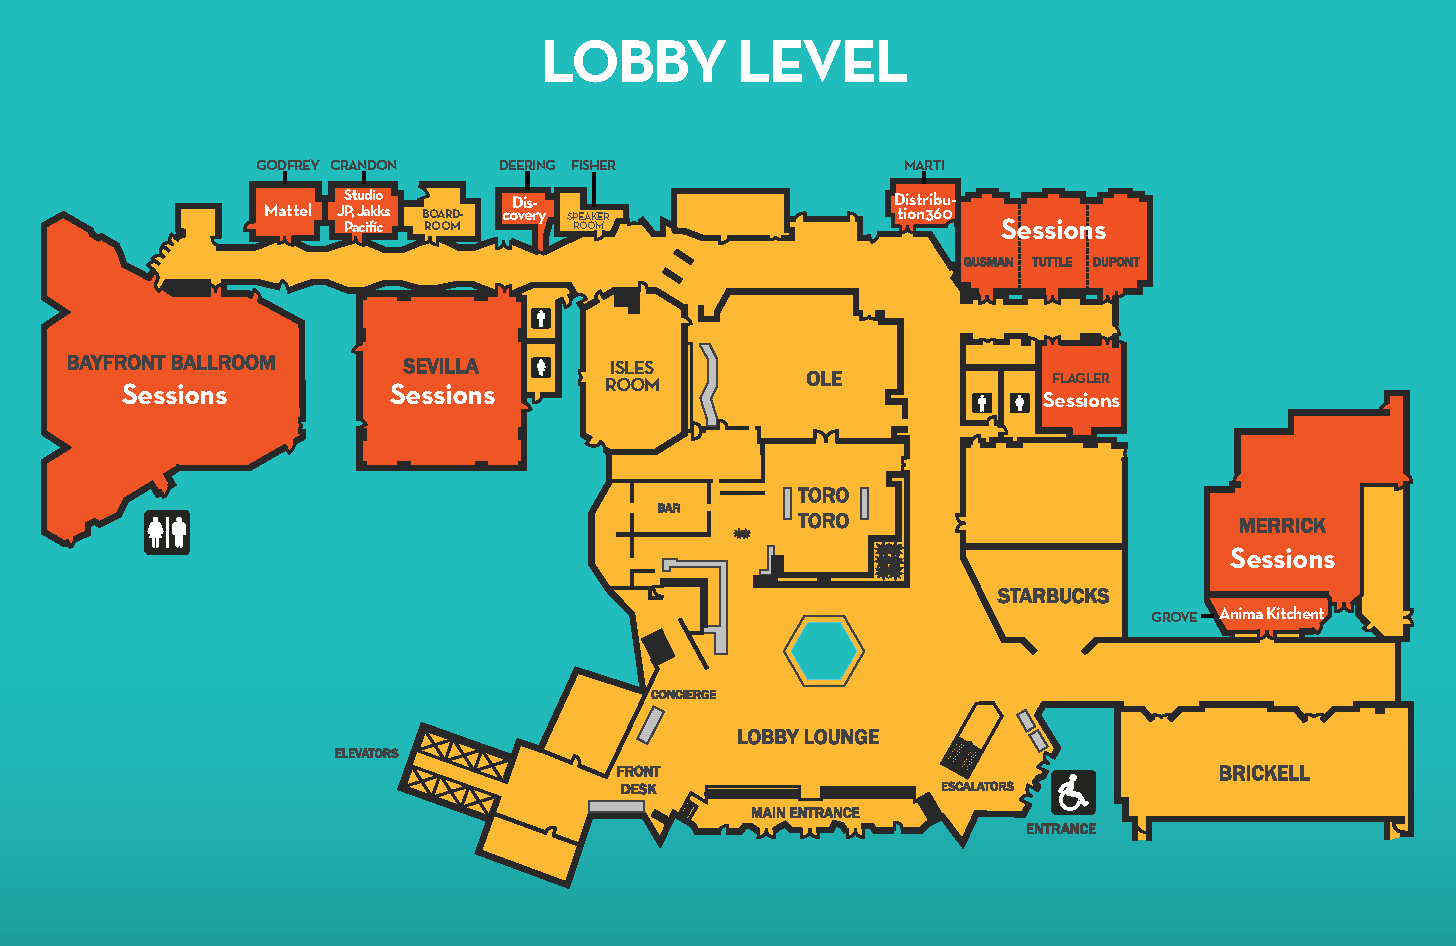 A floorplan of the Intercontinental Miami conference center lobby